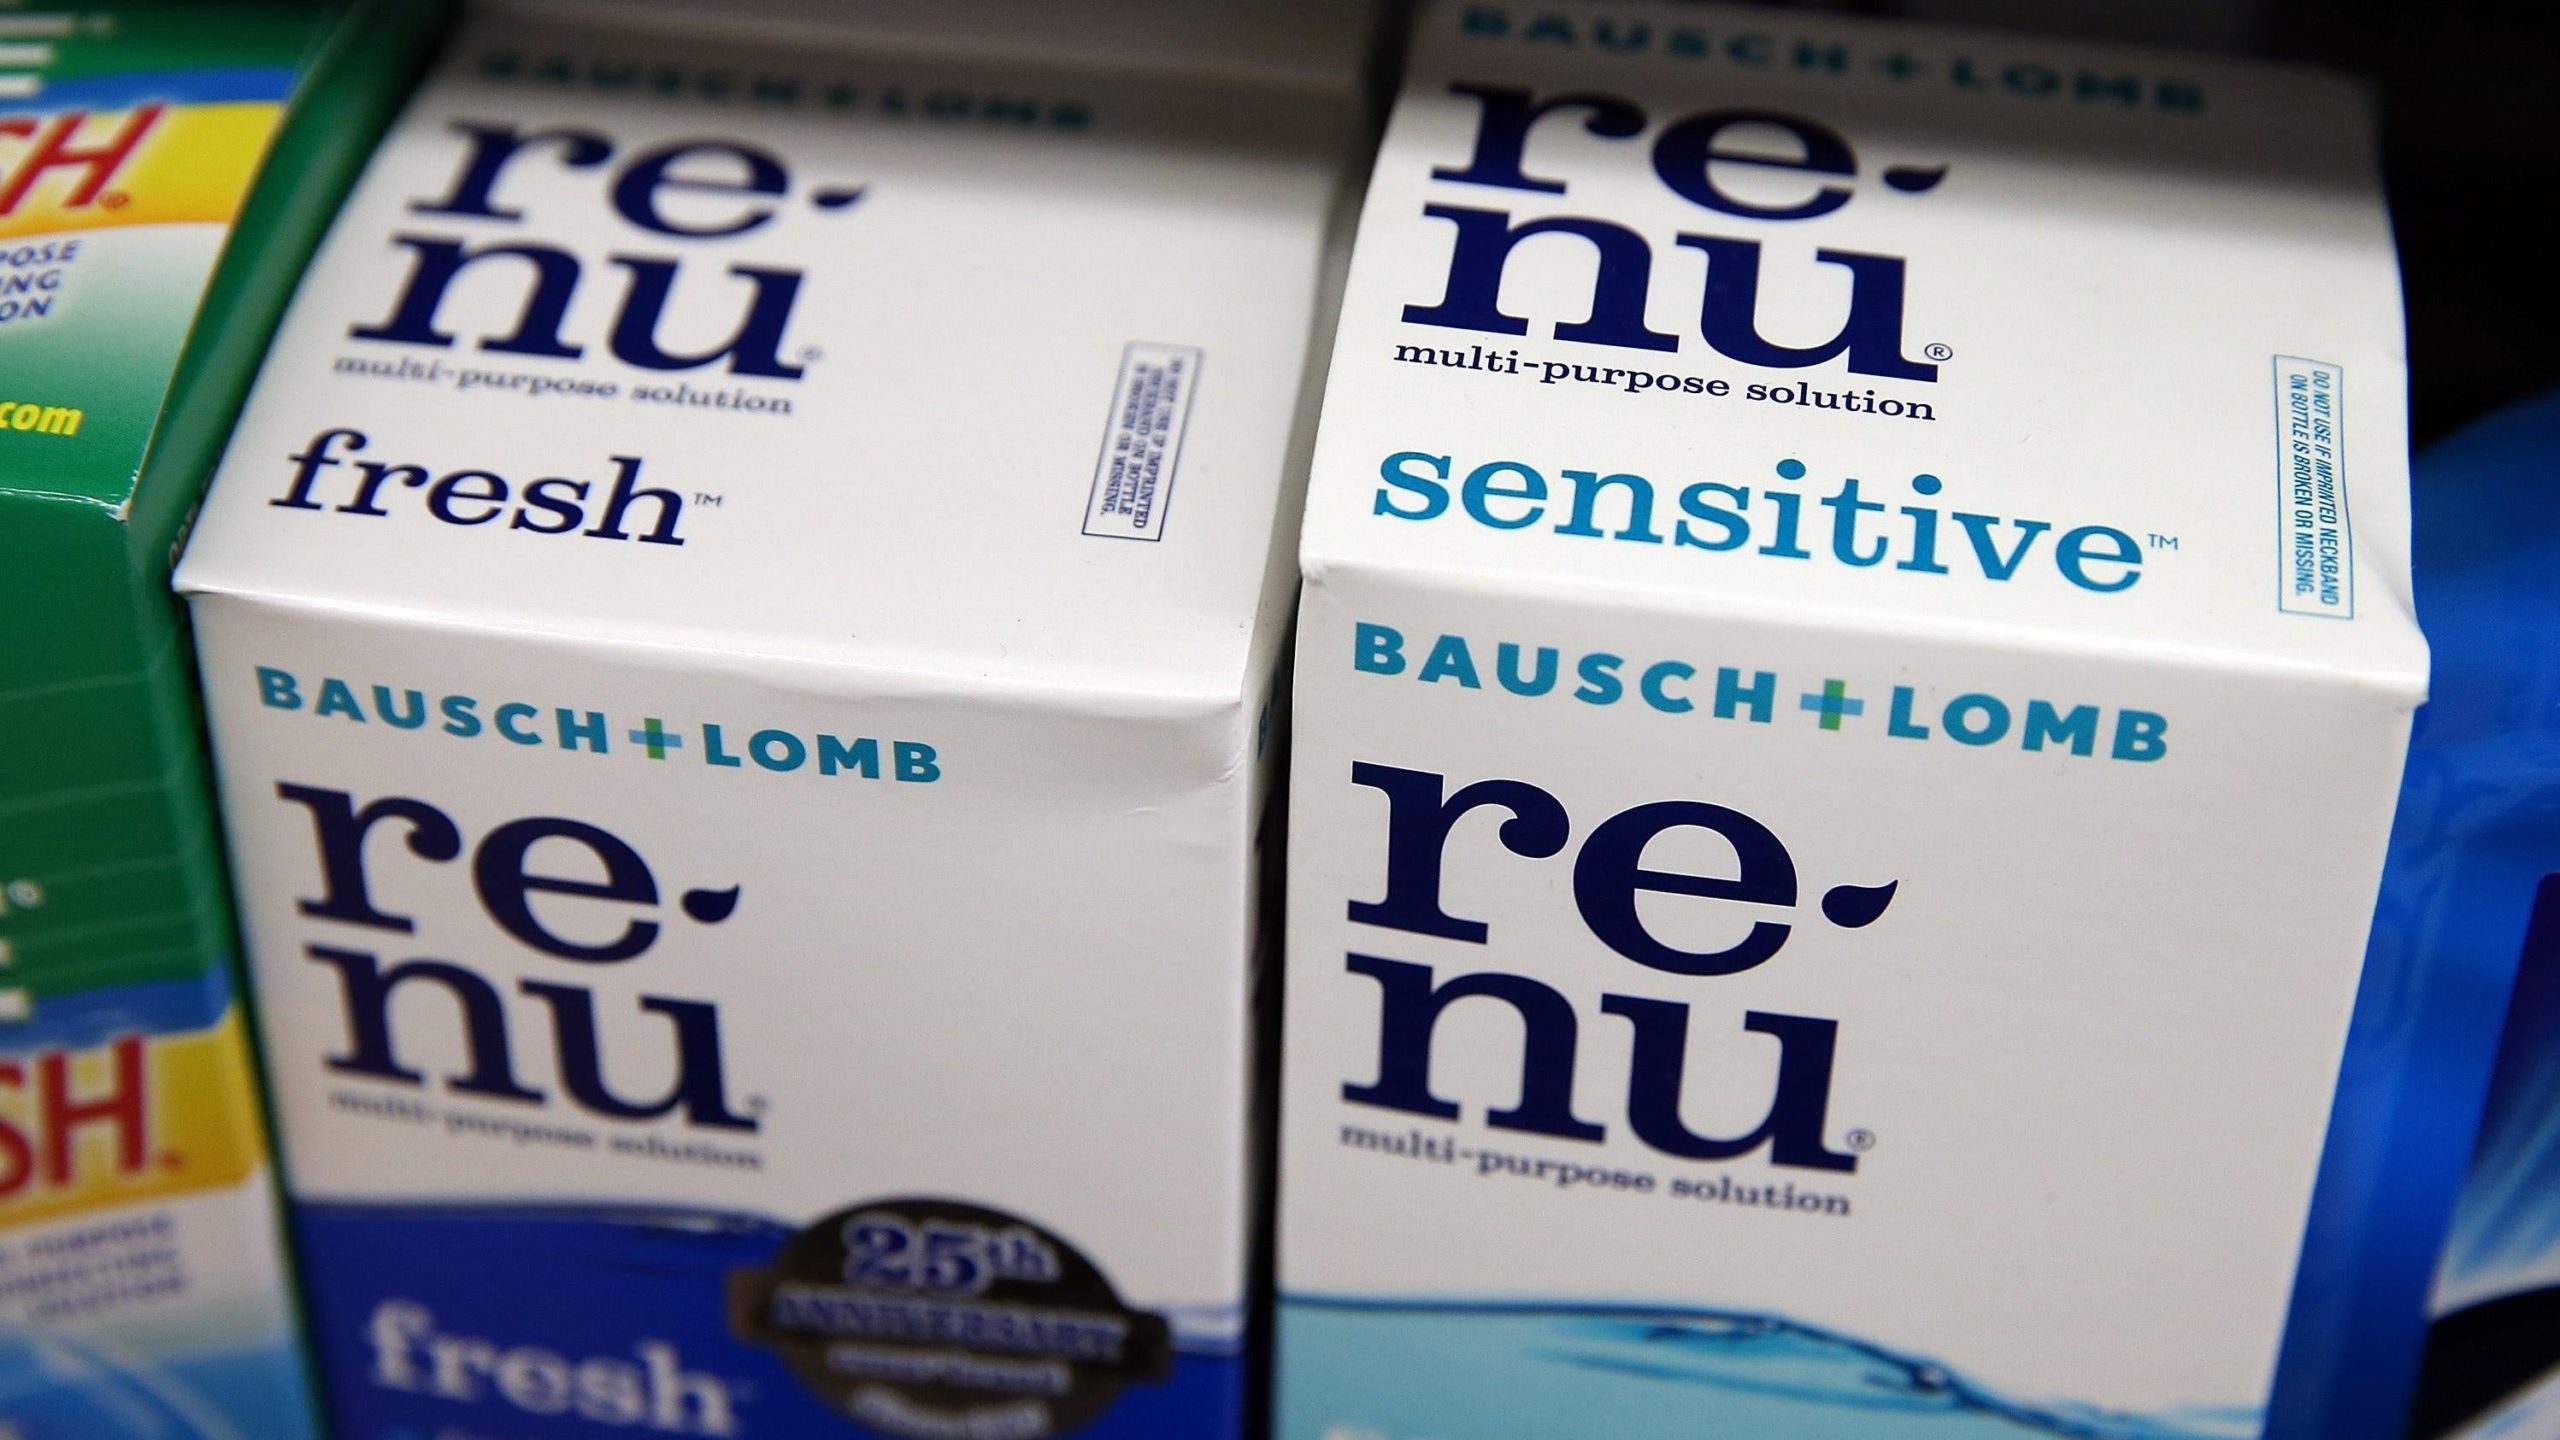 Boxes of Bausch and Lomb contact lens solution sit on a shelf at Arguello Market on May 28, 2013 in San Francisco, California.  (Photo: Justin Sullivan, Getty Images)